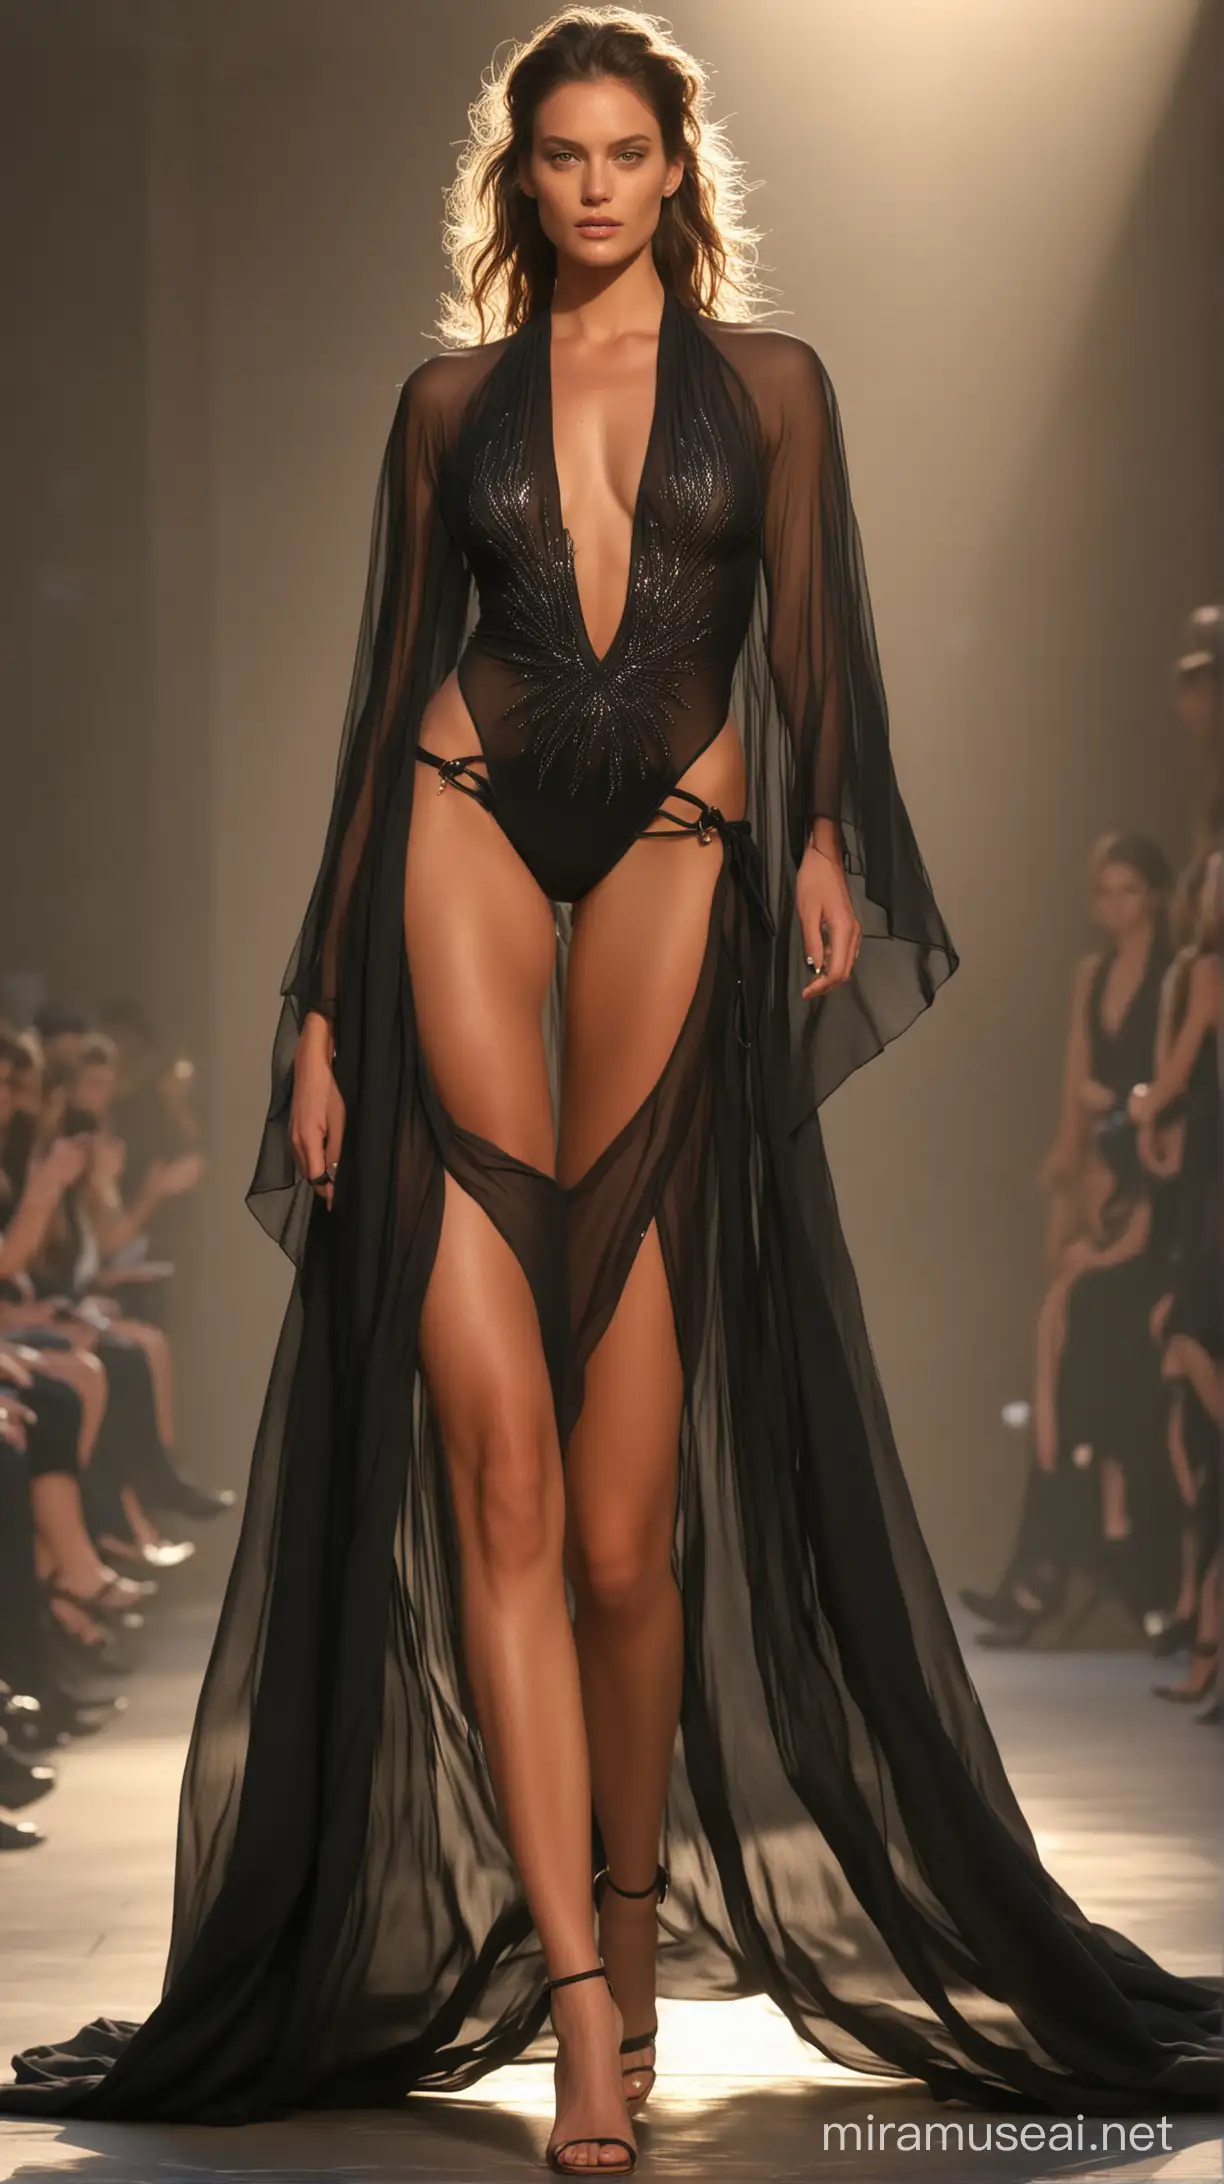 Stunning supermodel runway motion for Montelago brand, front angle, wearing black charcoal bikini and only sheer large flowy long cape , hands in the pockets , hyper-realistic, golden hour, Alexander McQueen style